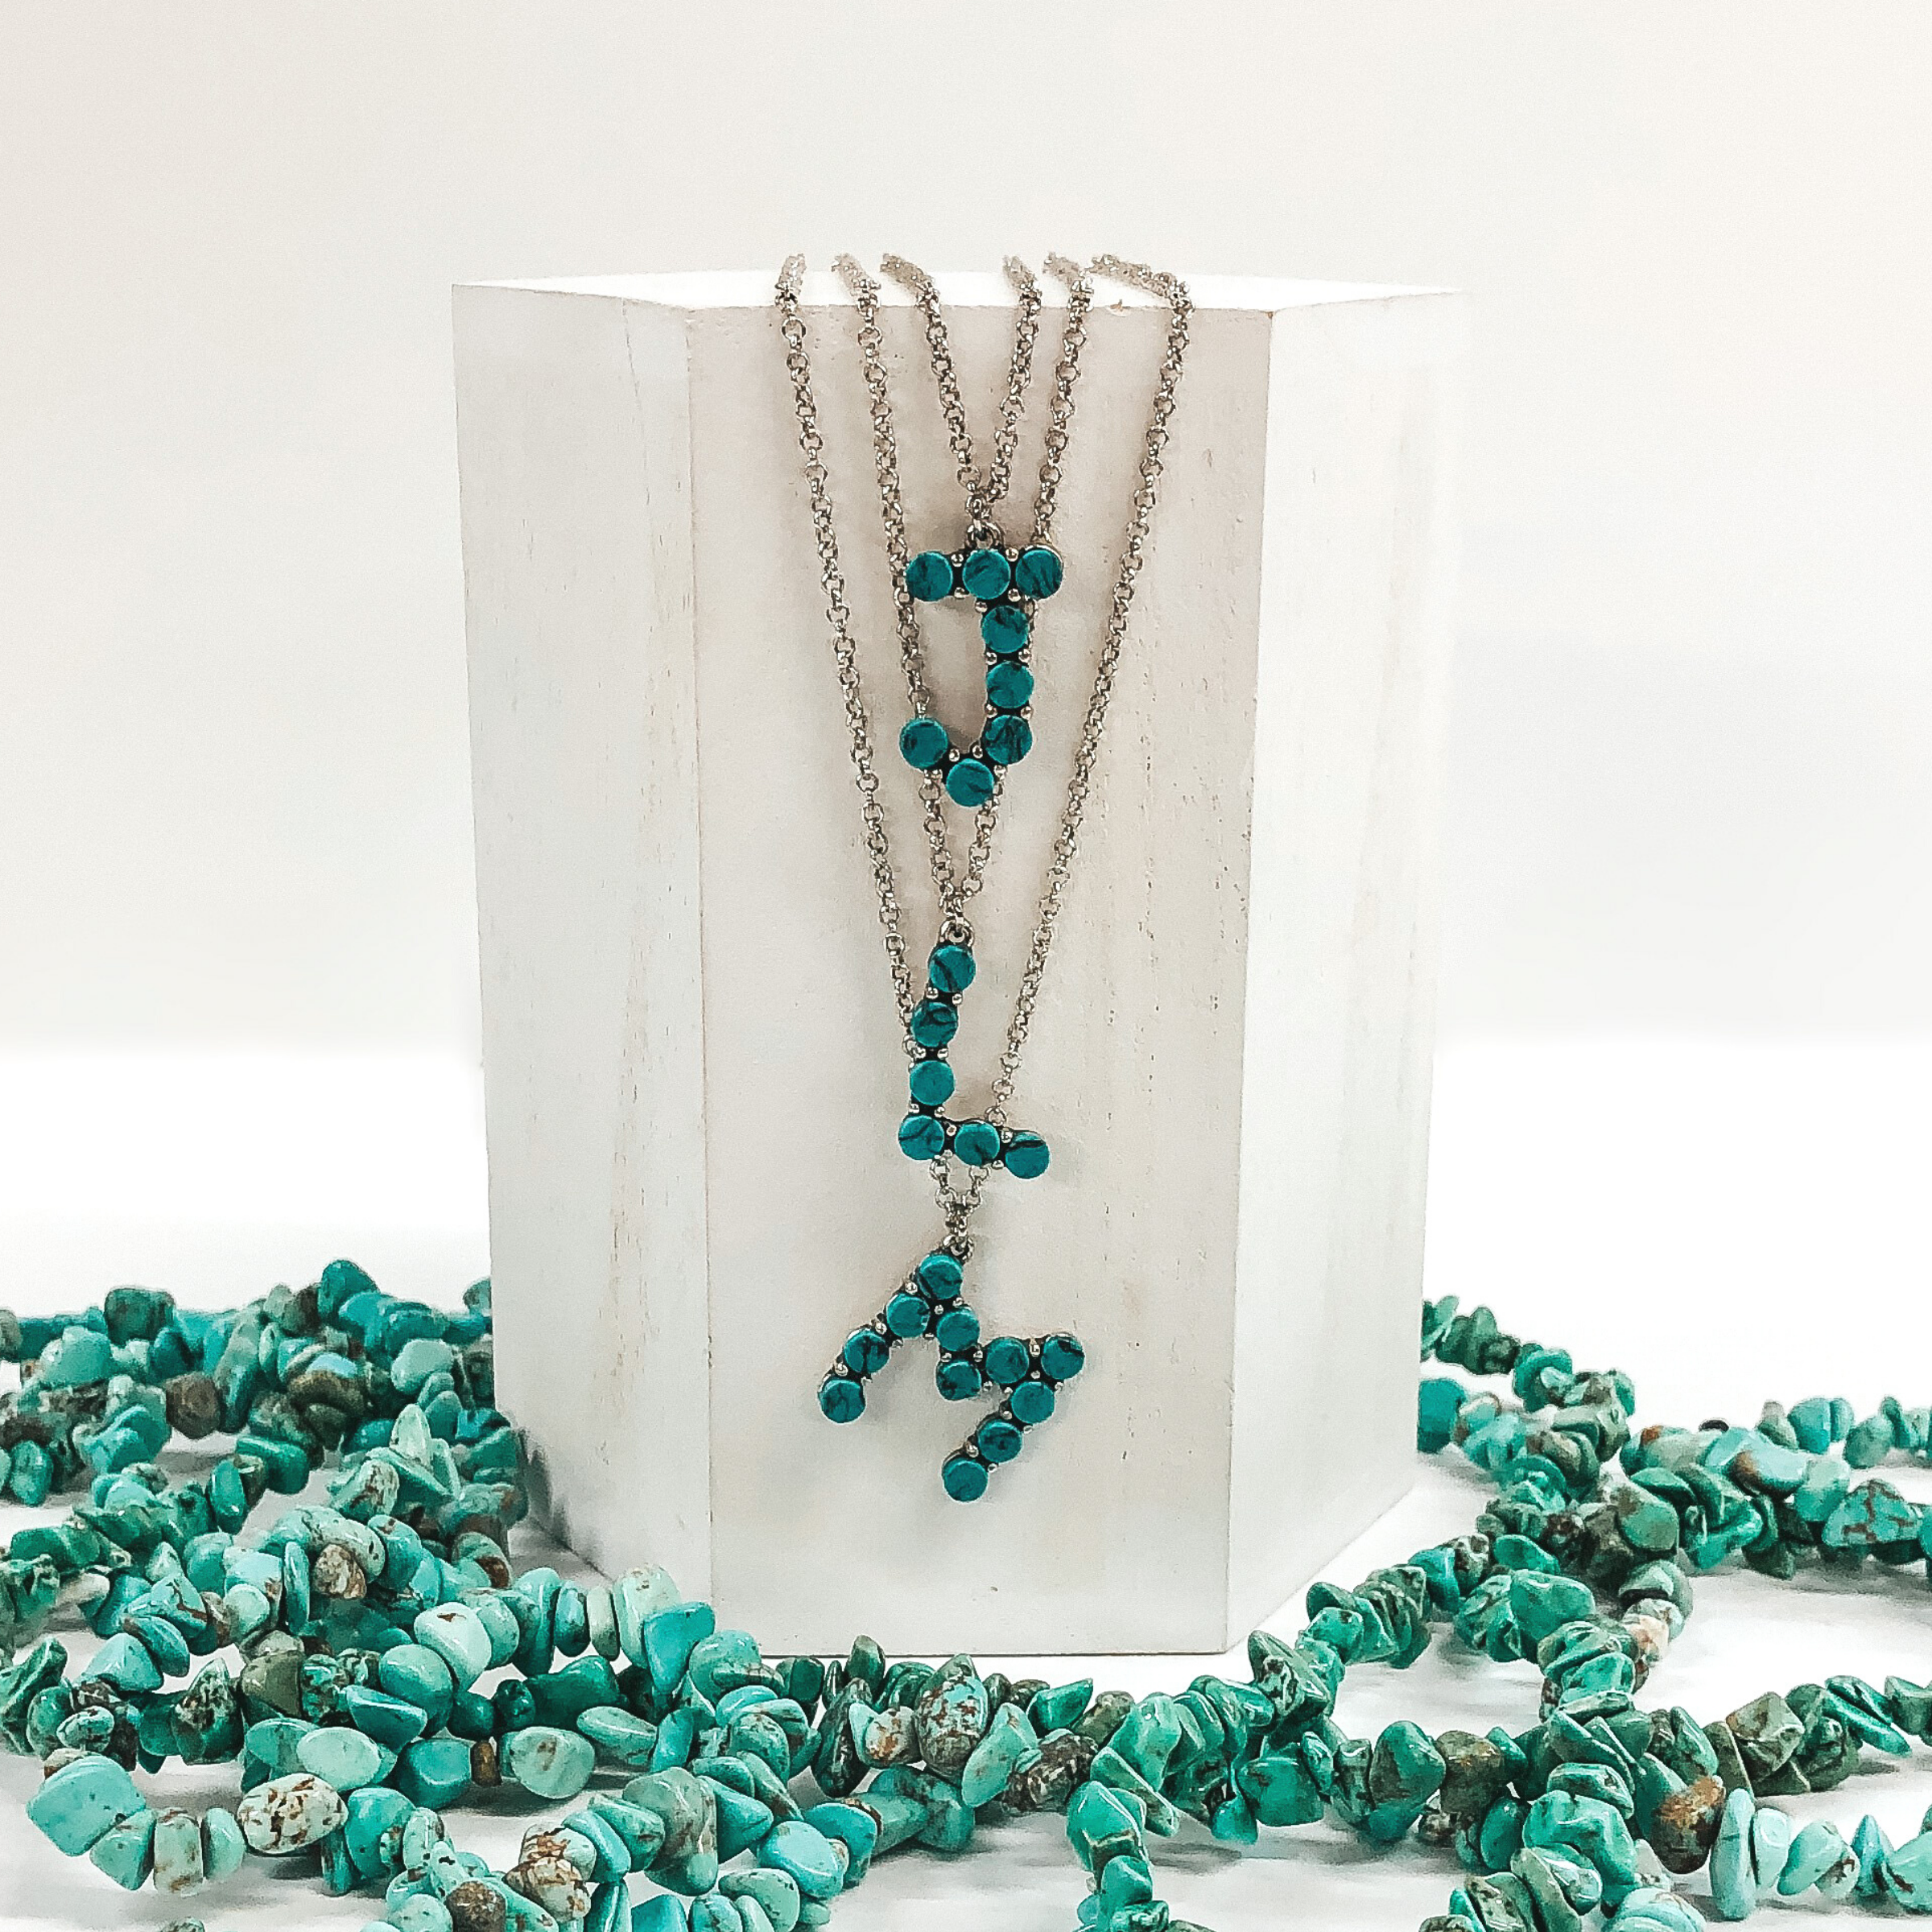 Mini Turquoise Initial Necklaces - Giddy Up Glamour Boutique